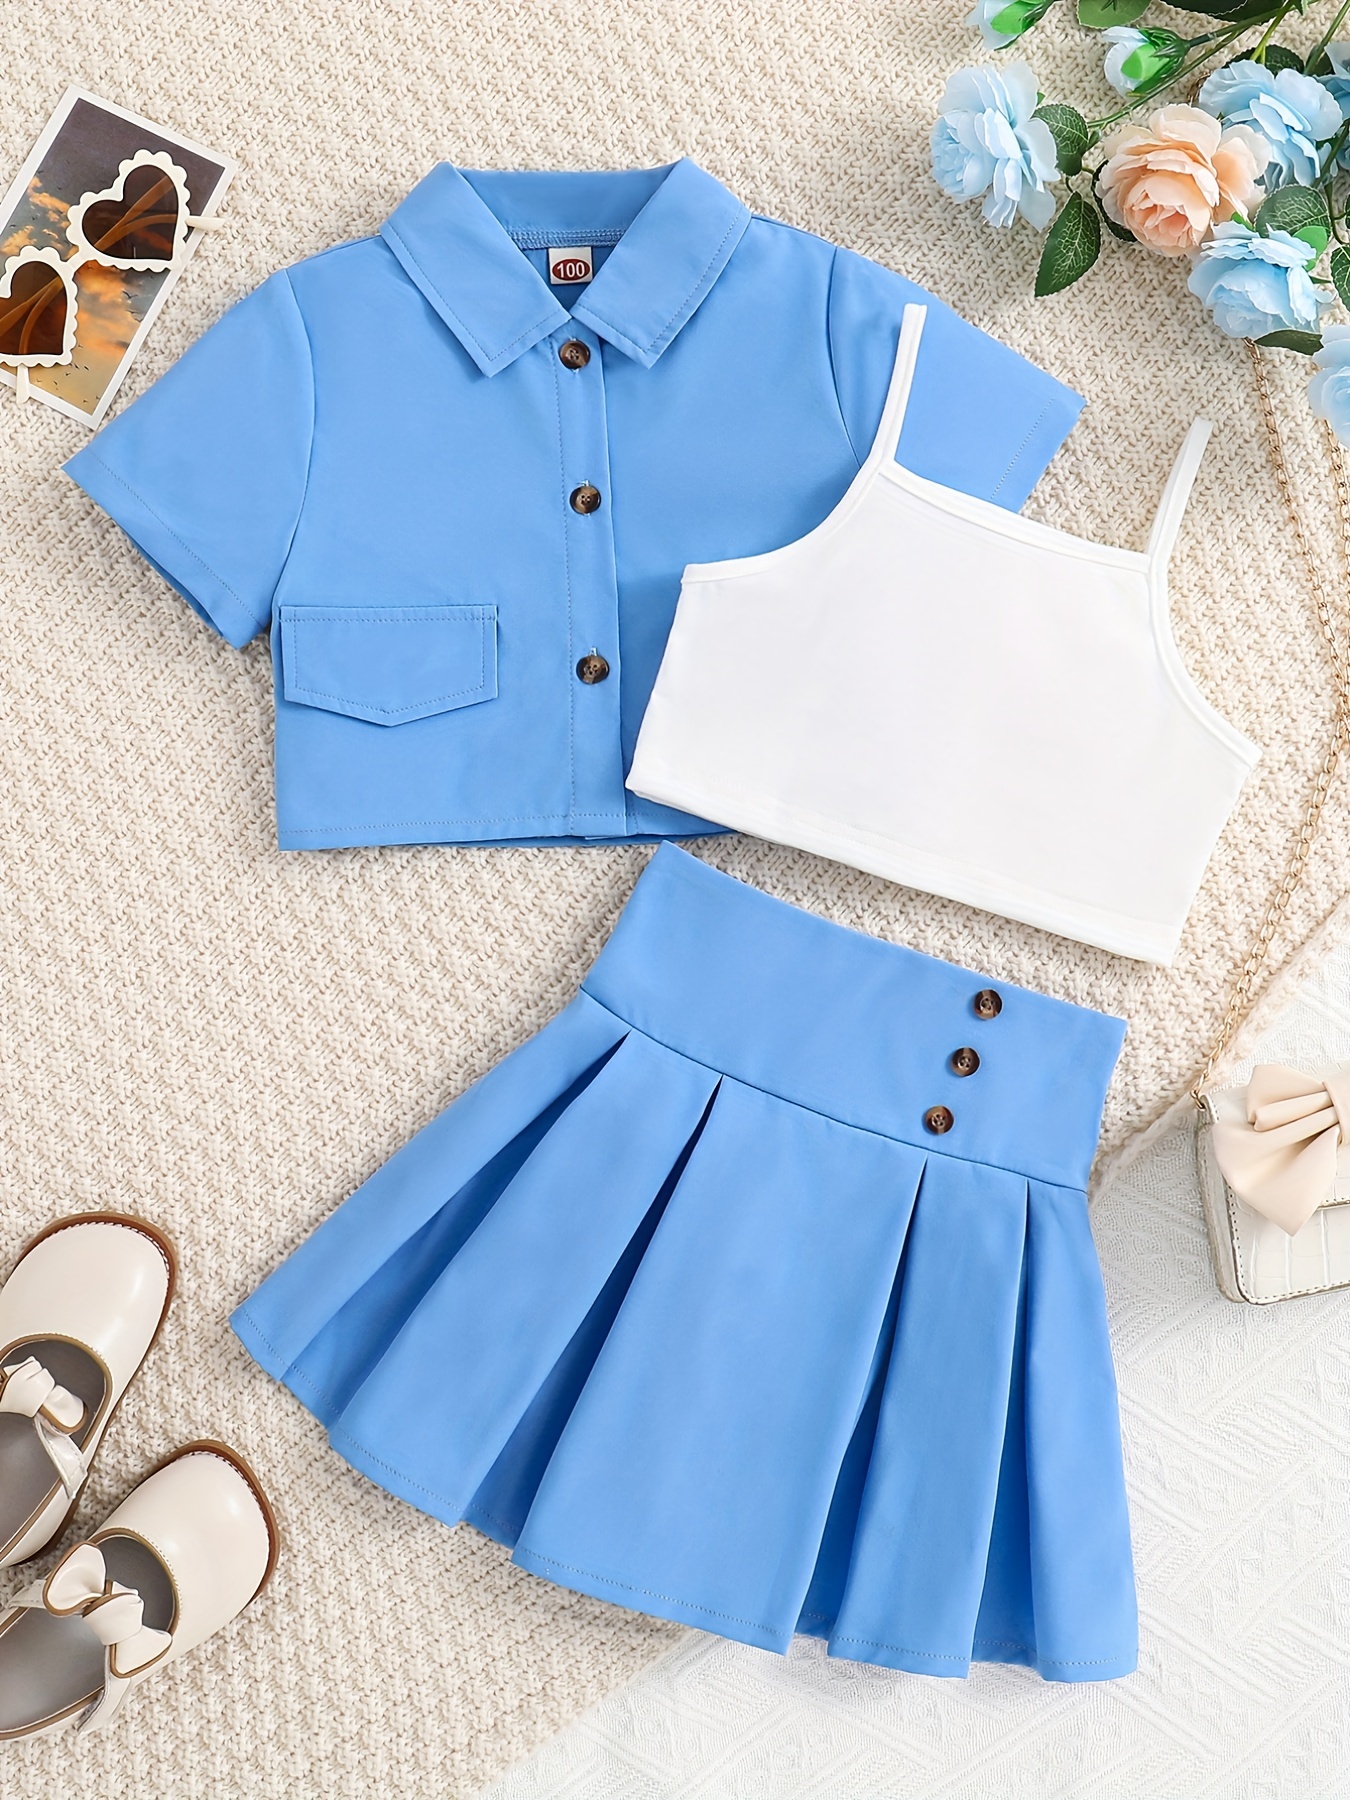 Girls Summer Lace Sleeve T Shirt And Skirt Outfit Cute Kids Clothing Set In  For Teens And Babies Ages 3 12 From Qiaomaidou04, $21.22